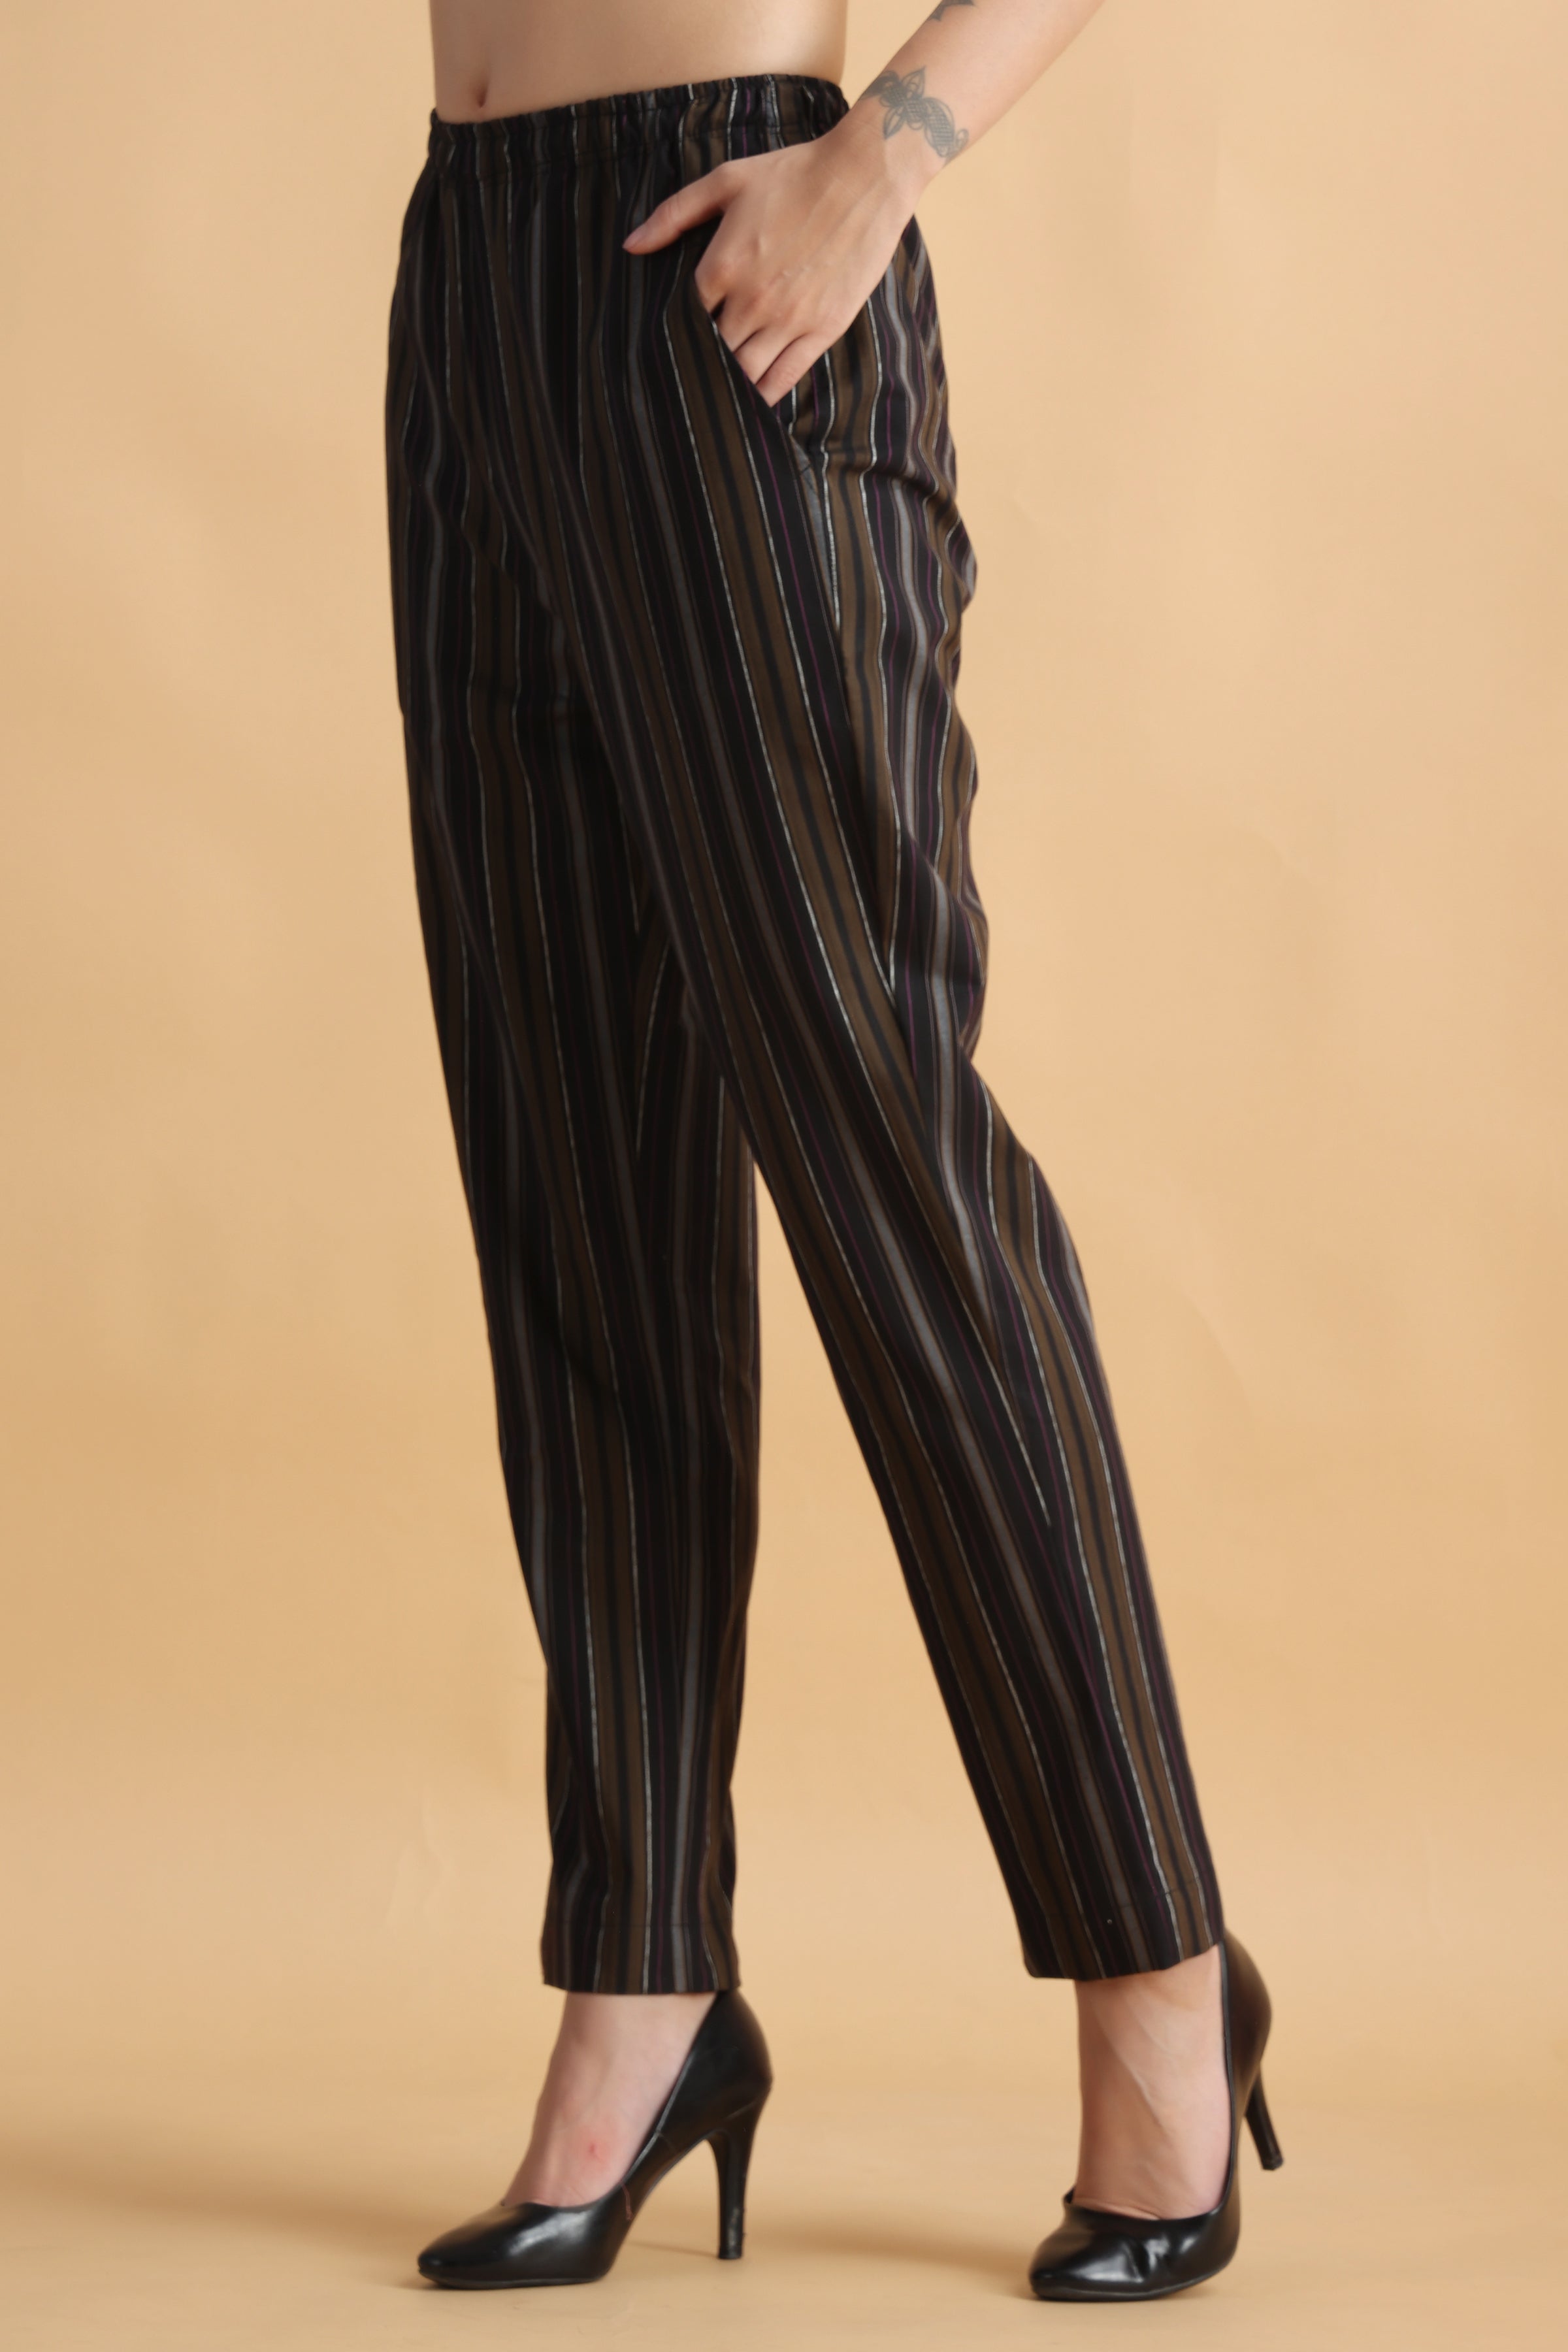 How to wear the striped palazzo pants  Just Trendy Girls